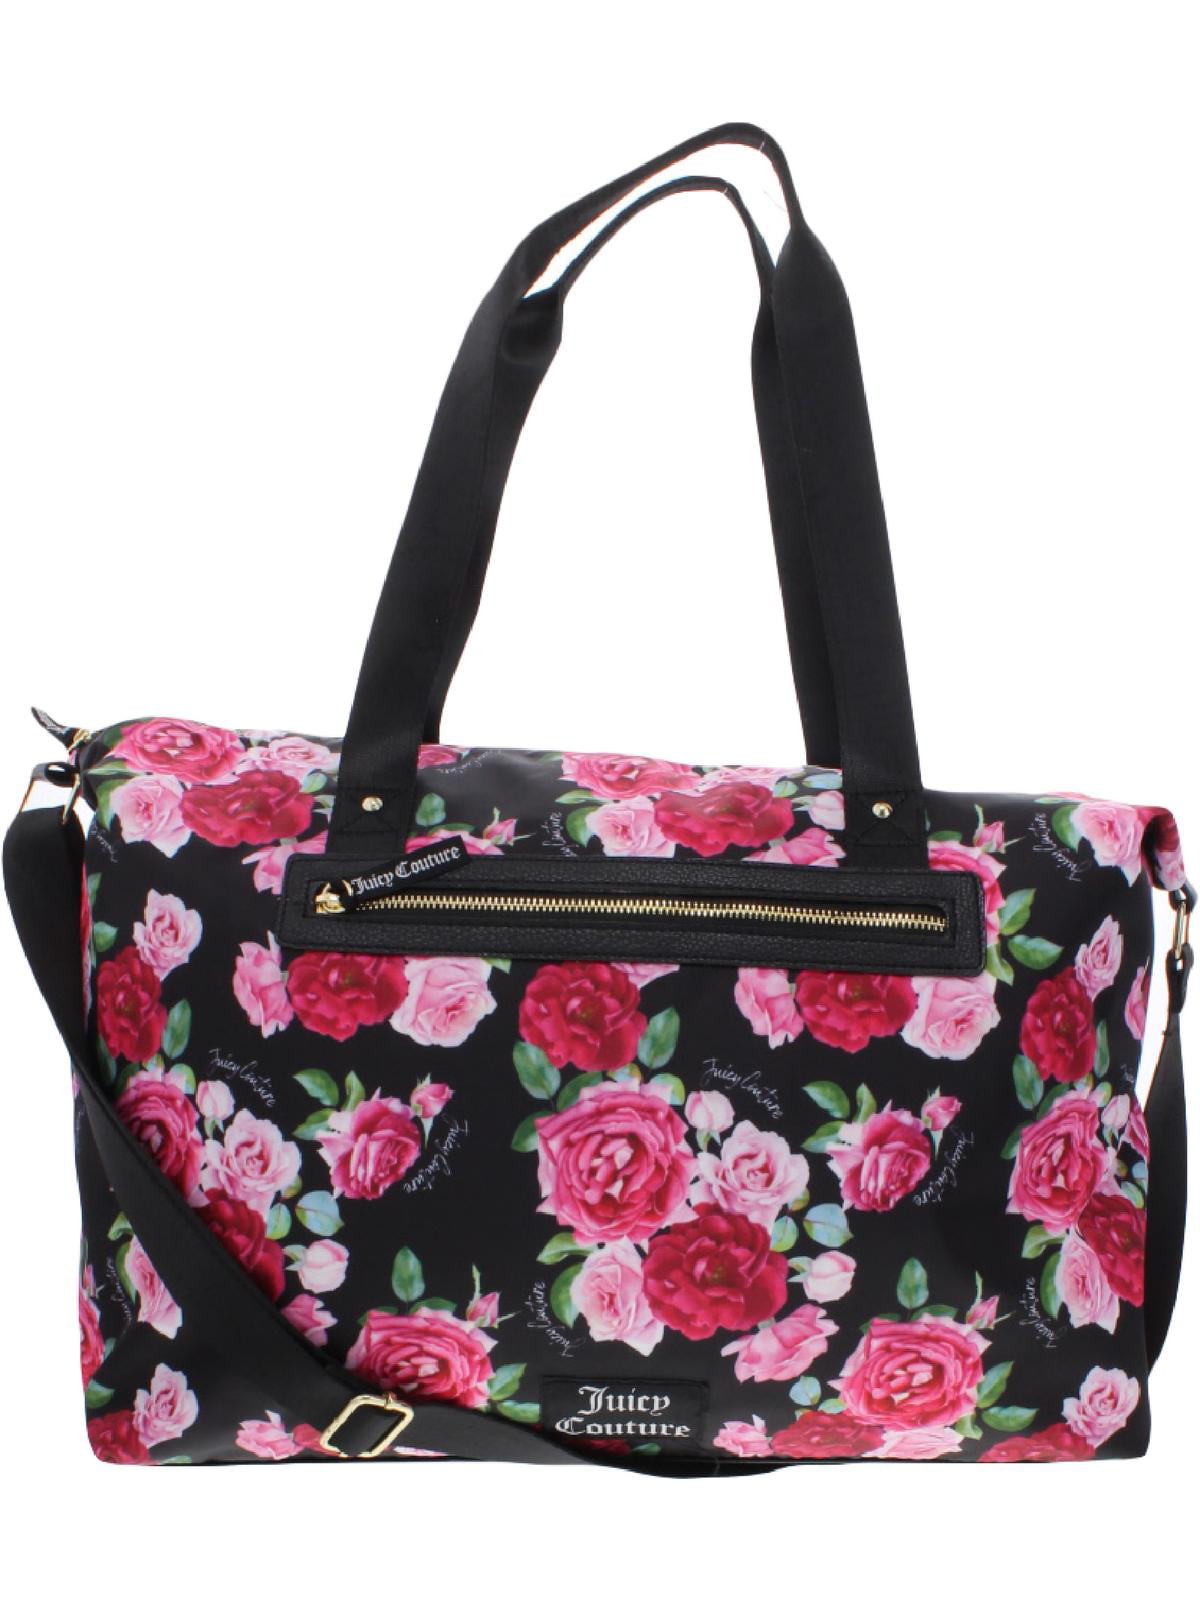 Juicy Couture Sport Yourself Women's Printed Convertible Overnighter ...